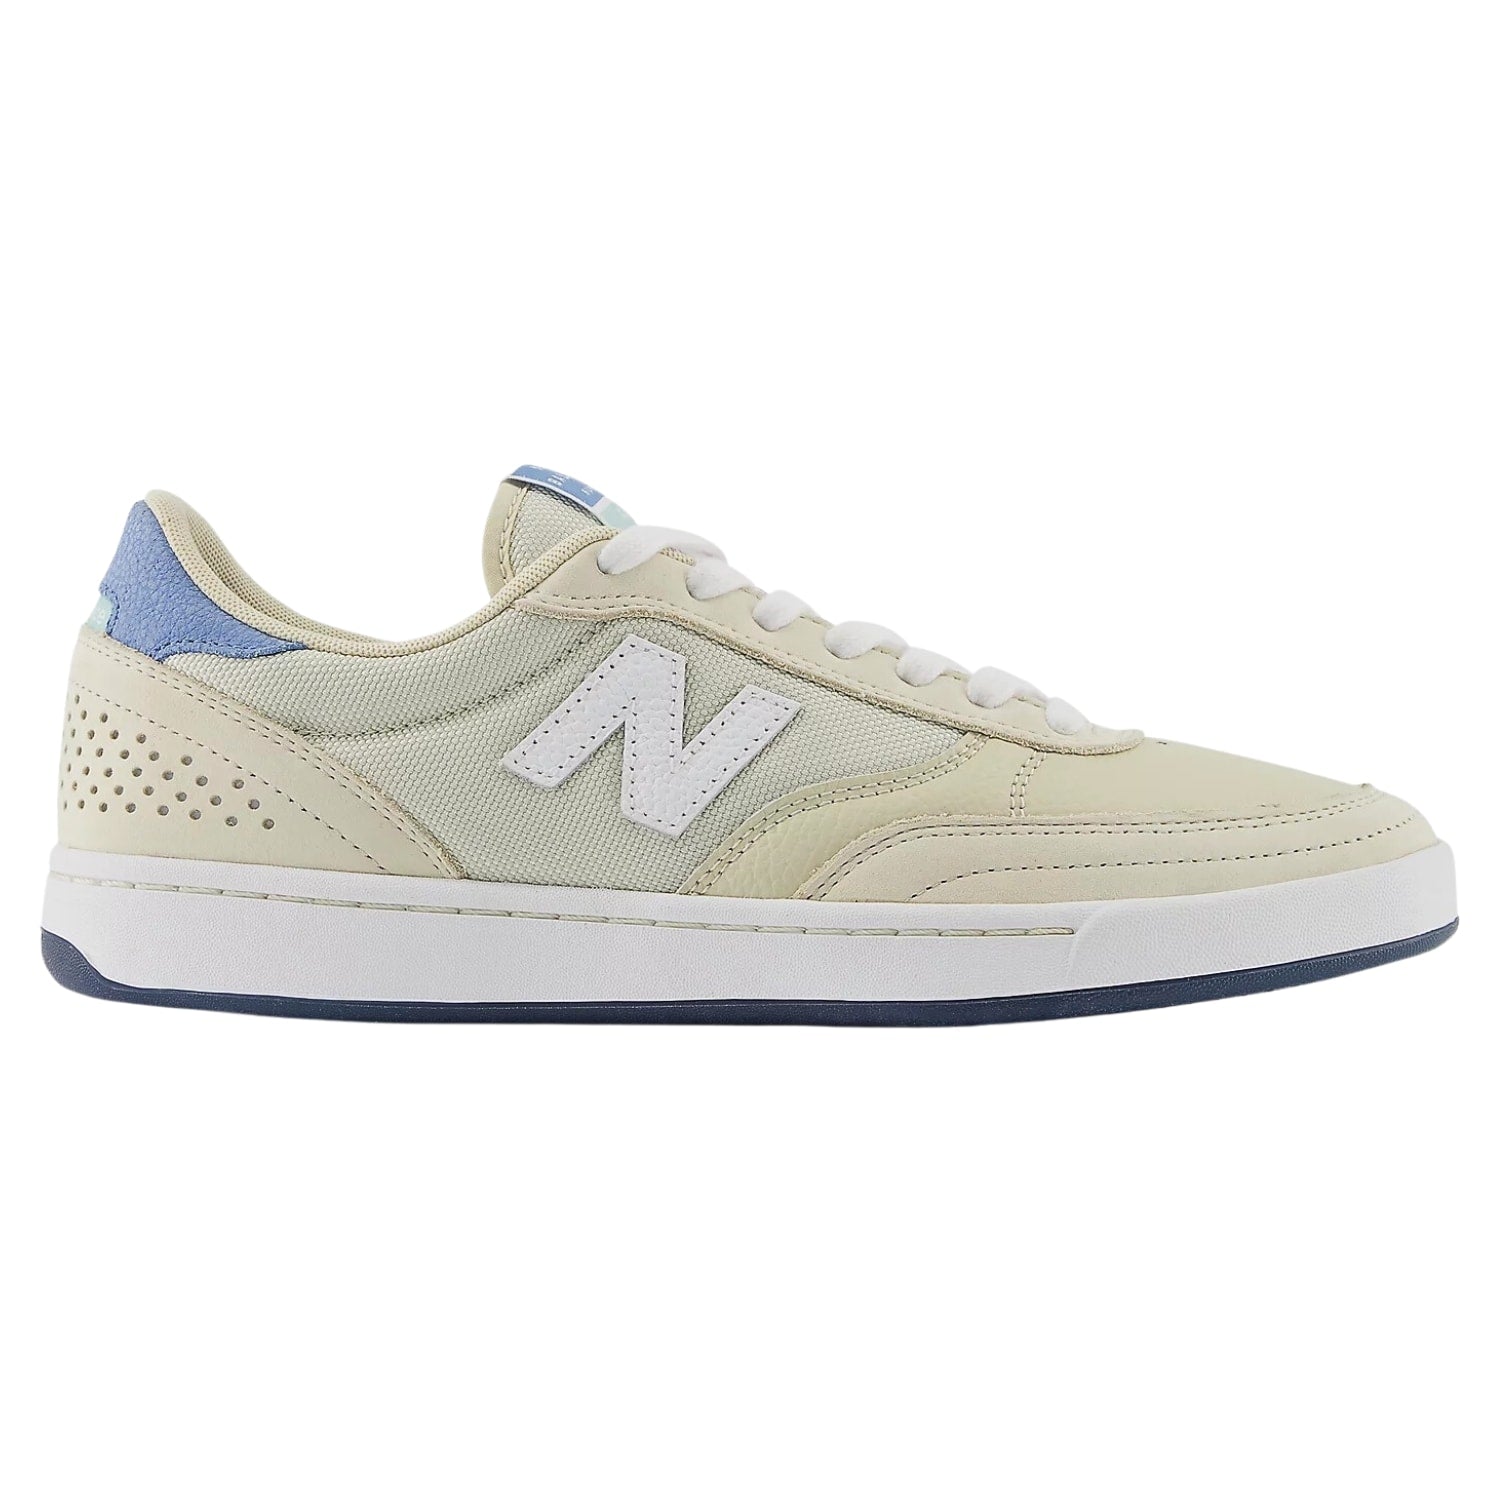 New Balance Numeric Nm440 X Welcome Skate Shoes - Sea Salt/Red - Mens Skate Shoes by New Balance Numeric